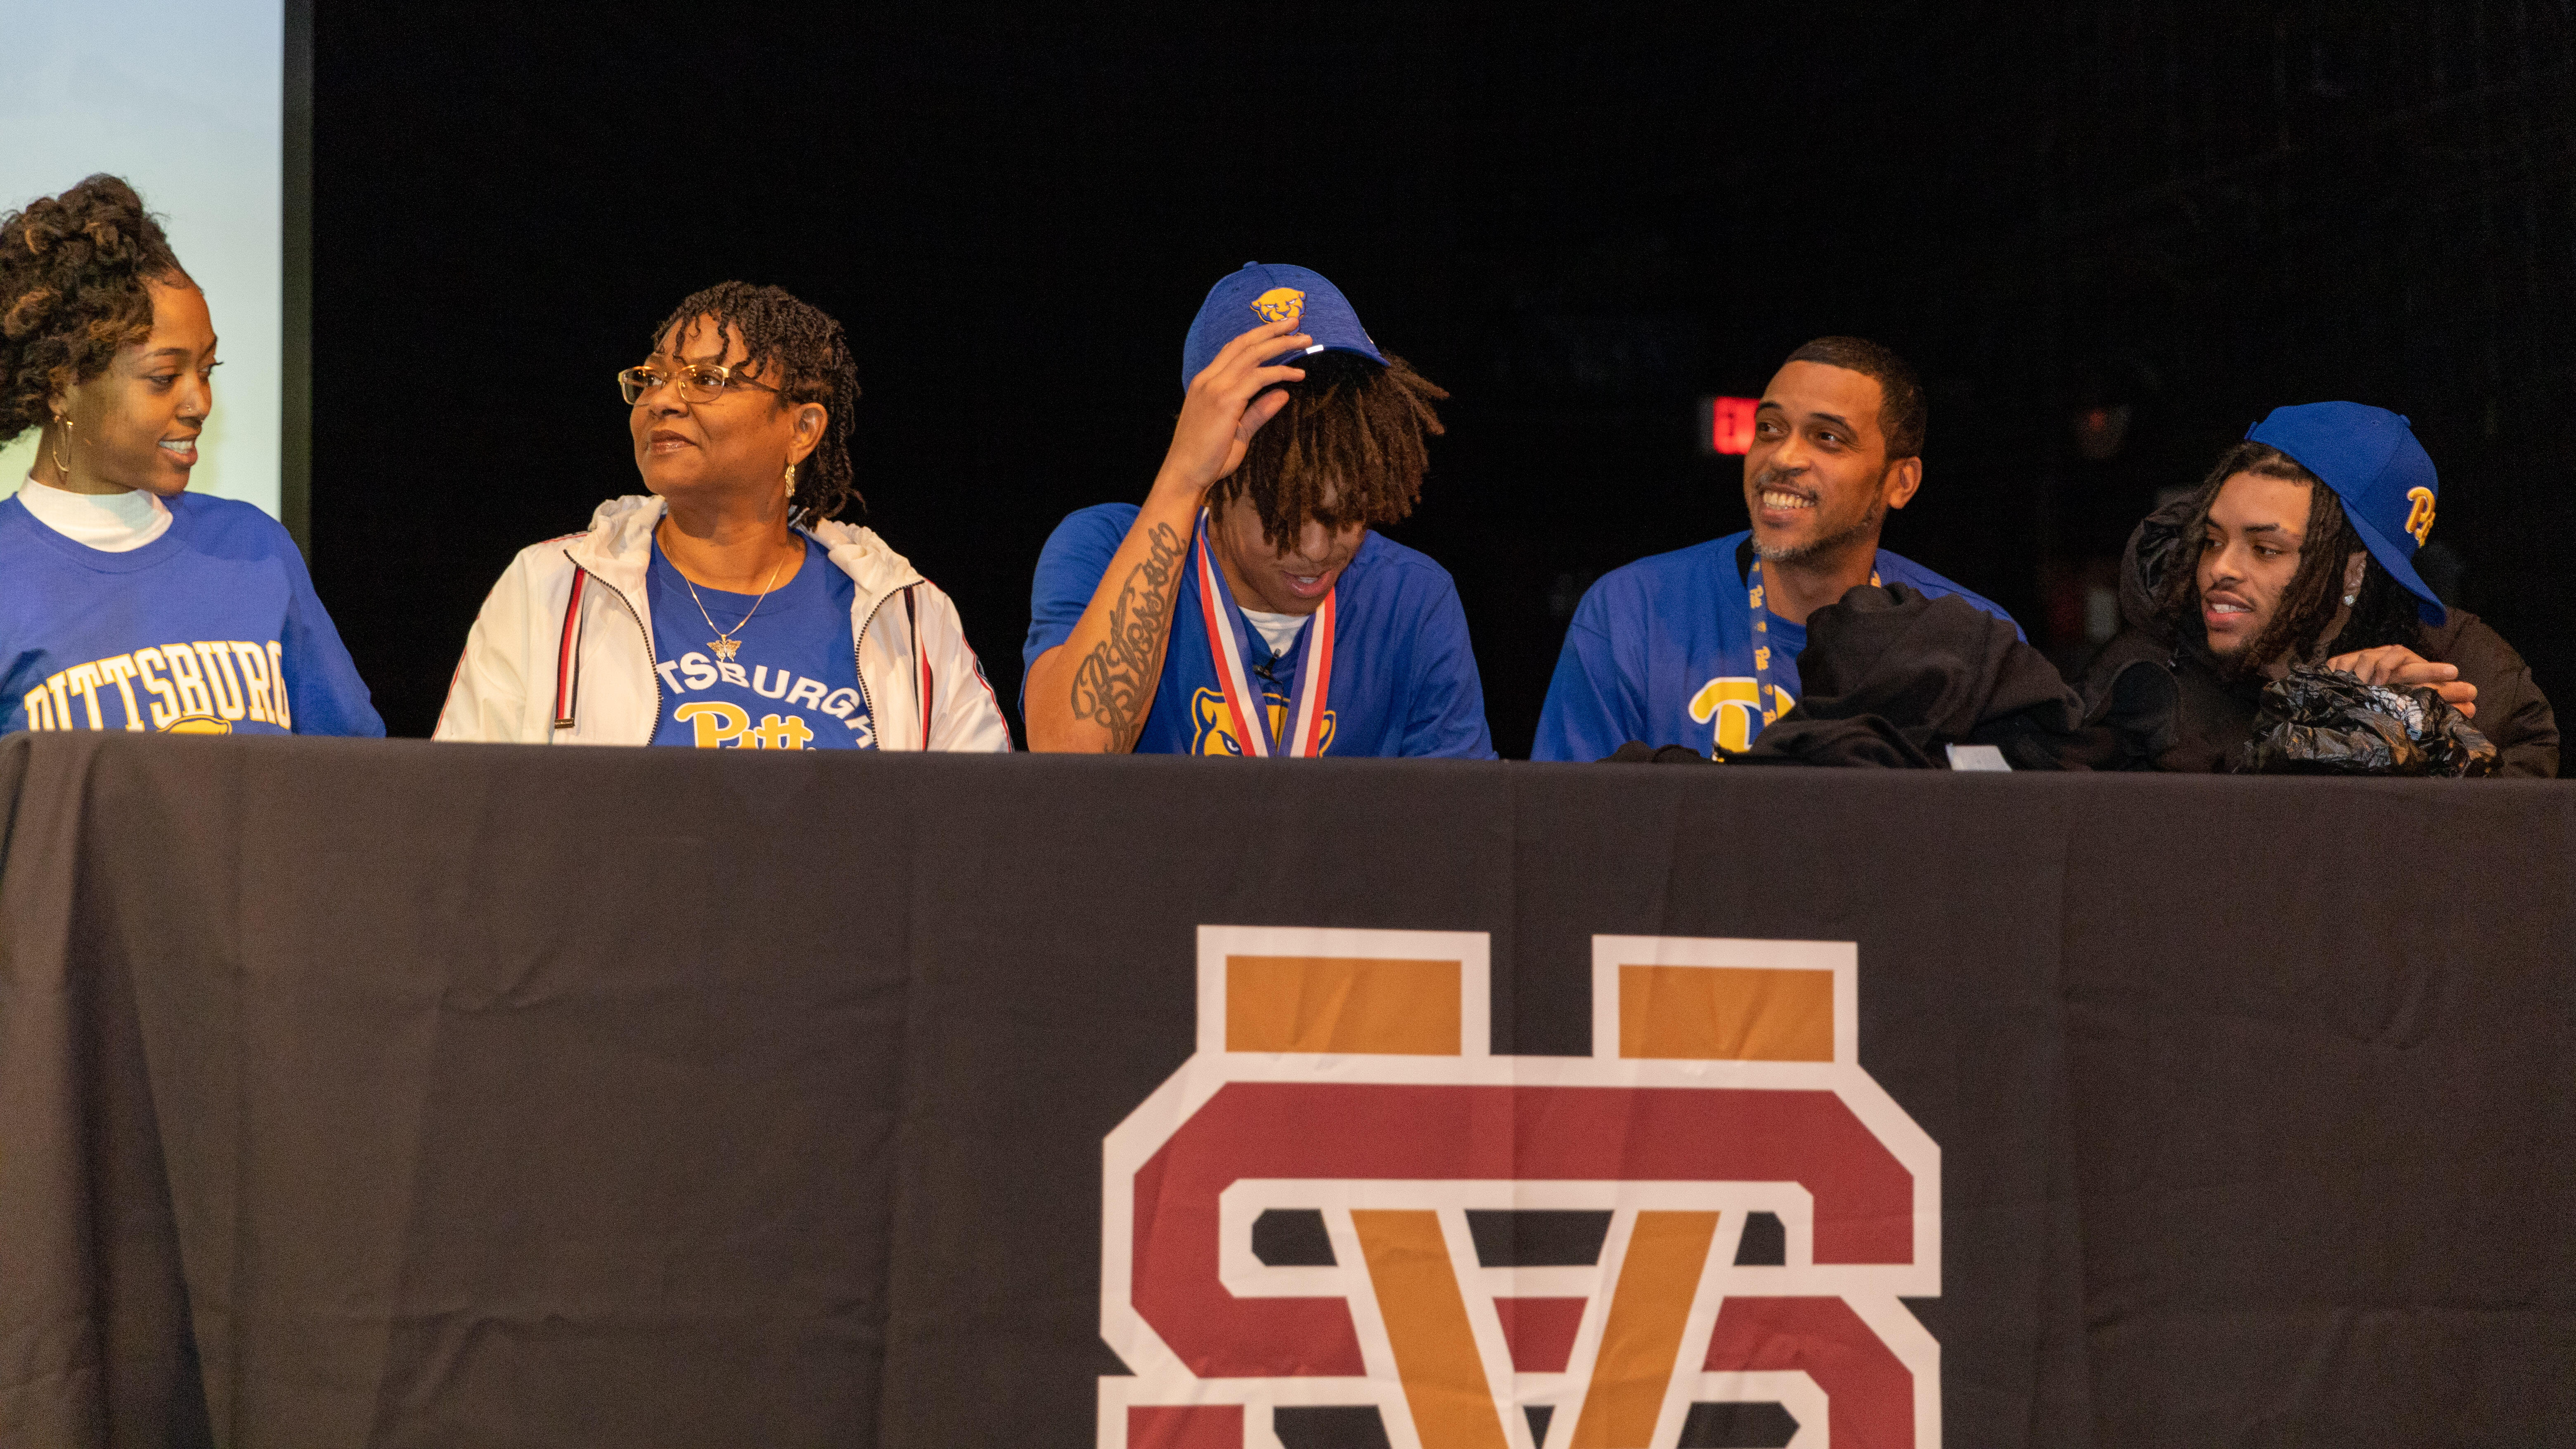 Cruce Brookins reveals his Pitt shirt underneath a hoodie to announce where he's going to college. He is seated at a table on a stage.